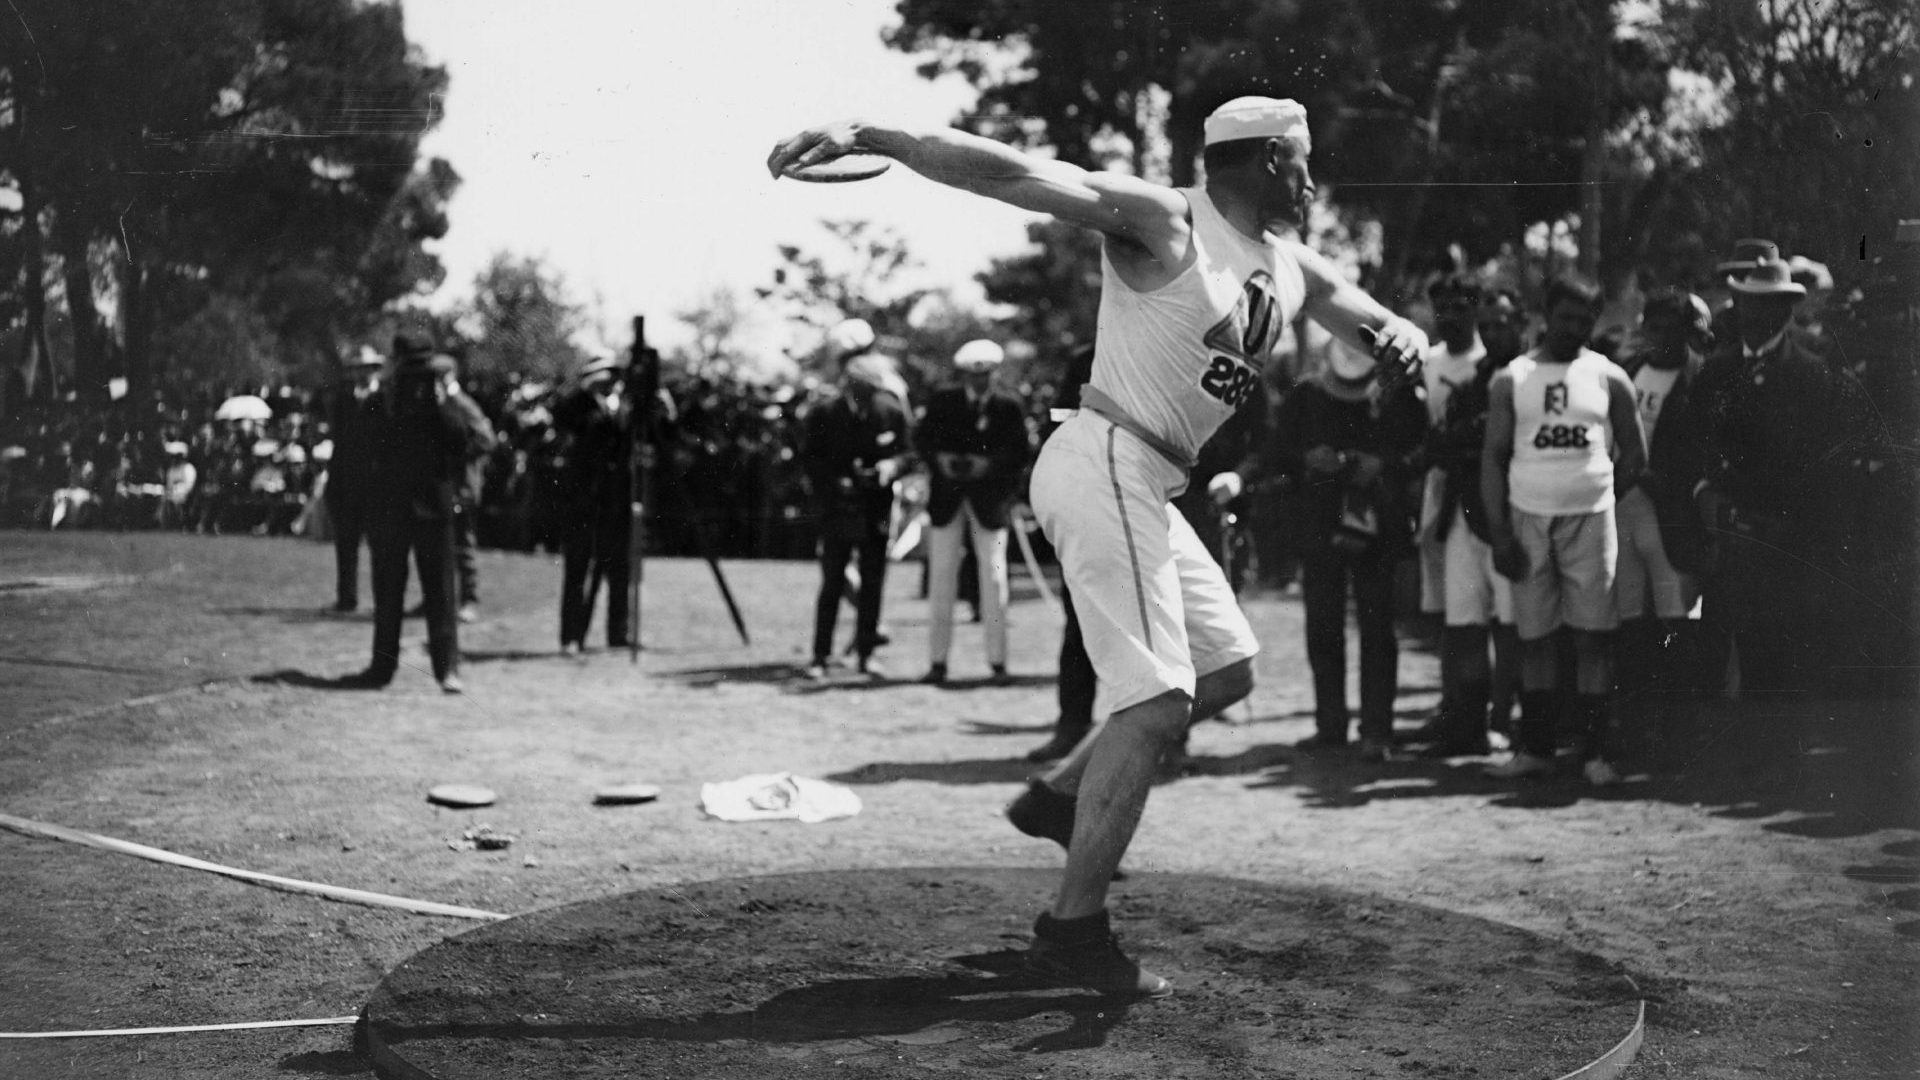 Jaervinen (Finland) on the discus throwing. Athens, on 1906. Photo: Branger/Roger Viollet via Getty Images